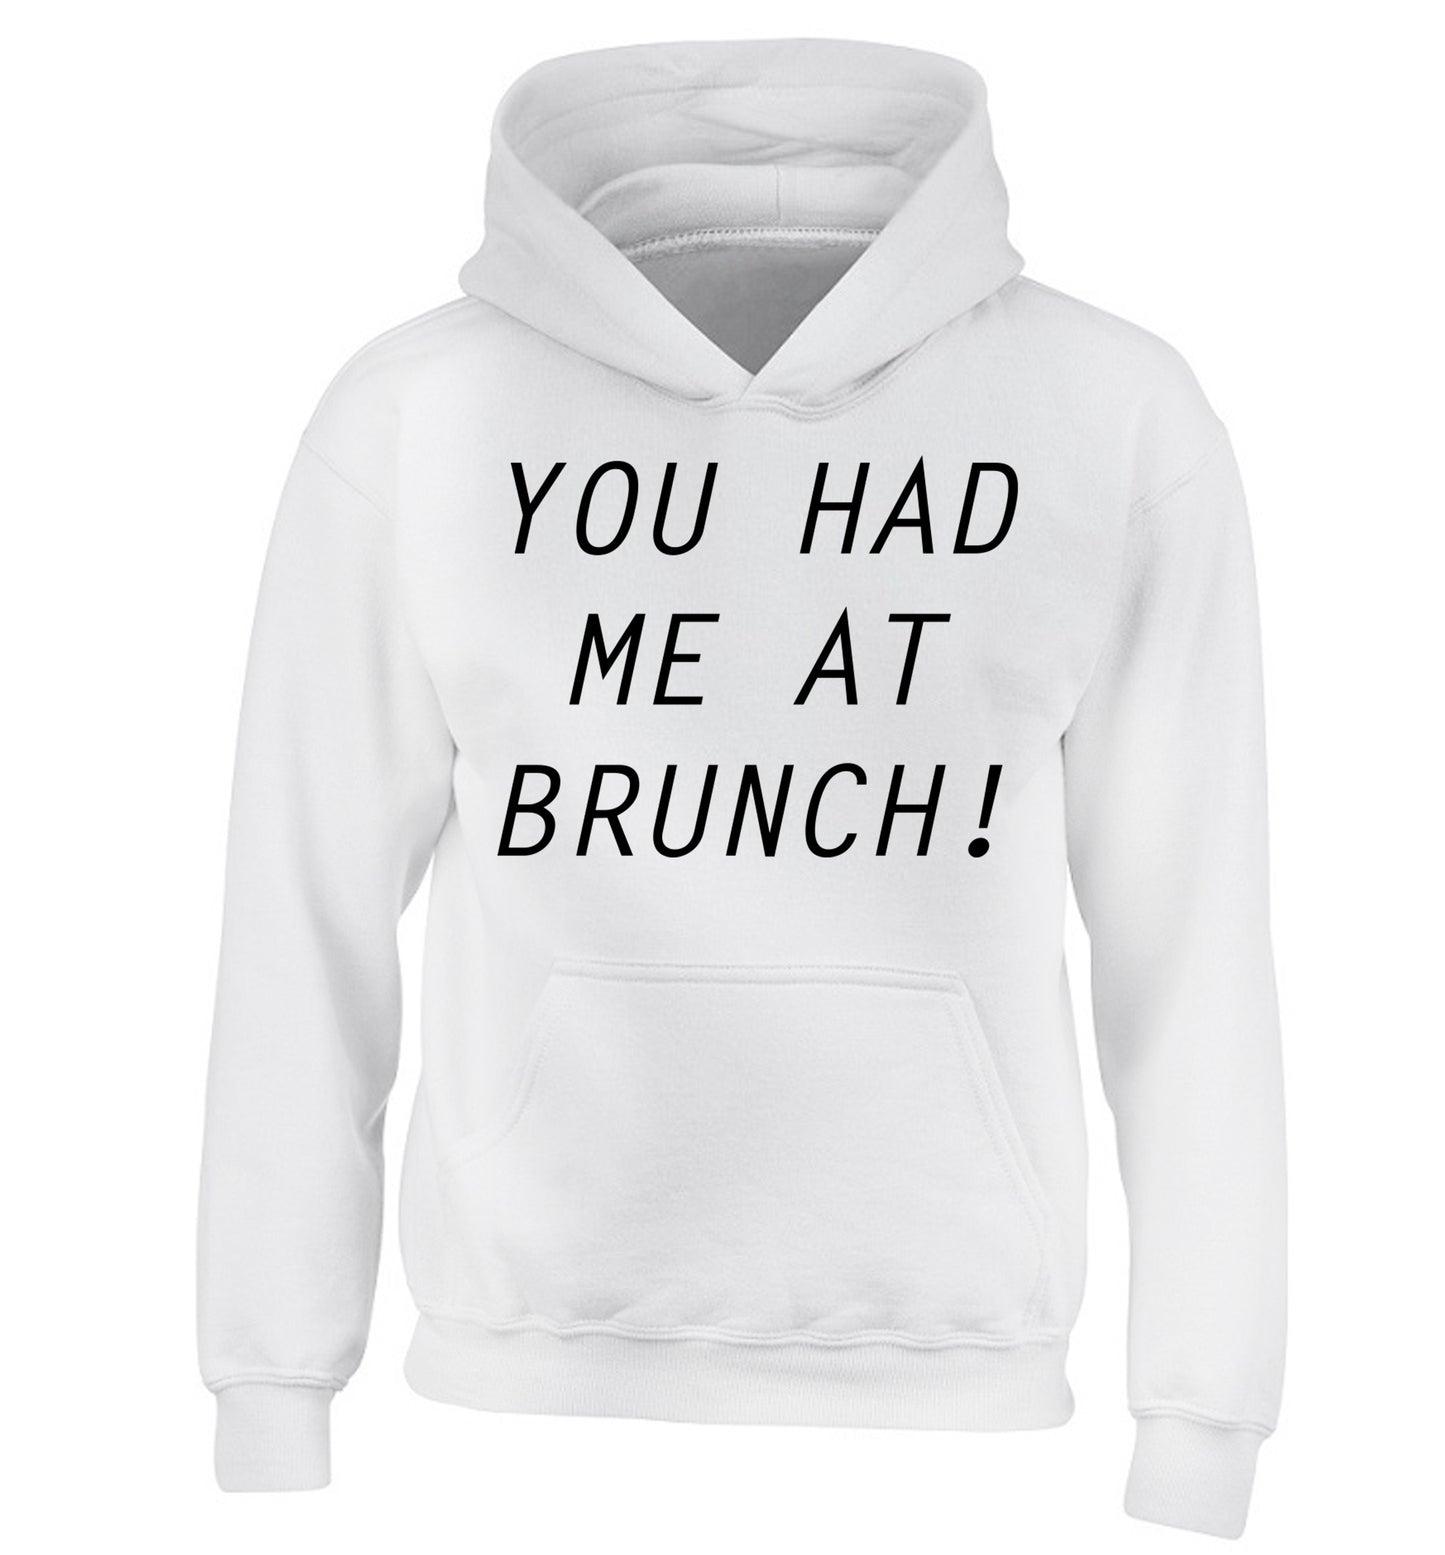 You had me at brunch children's white hoodie 12-14 Years